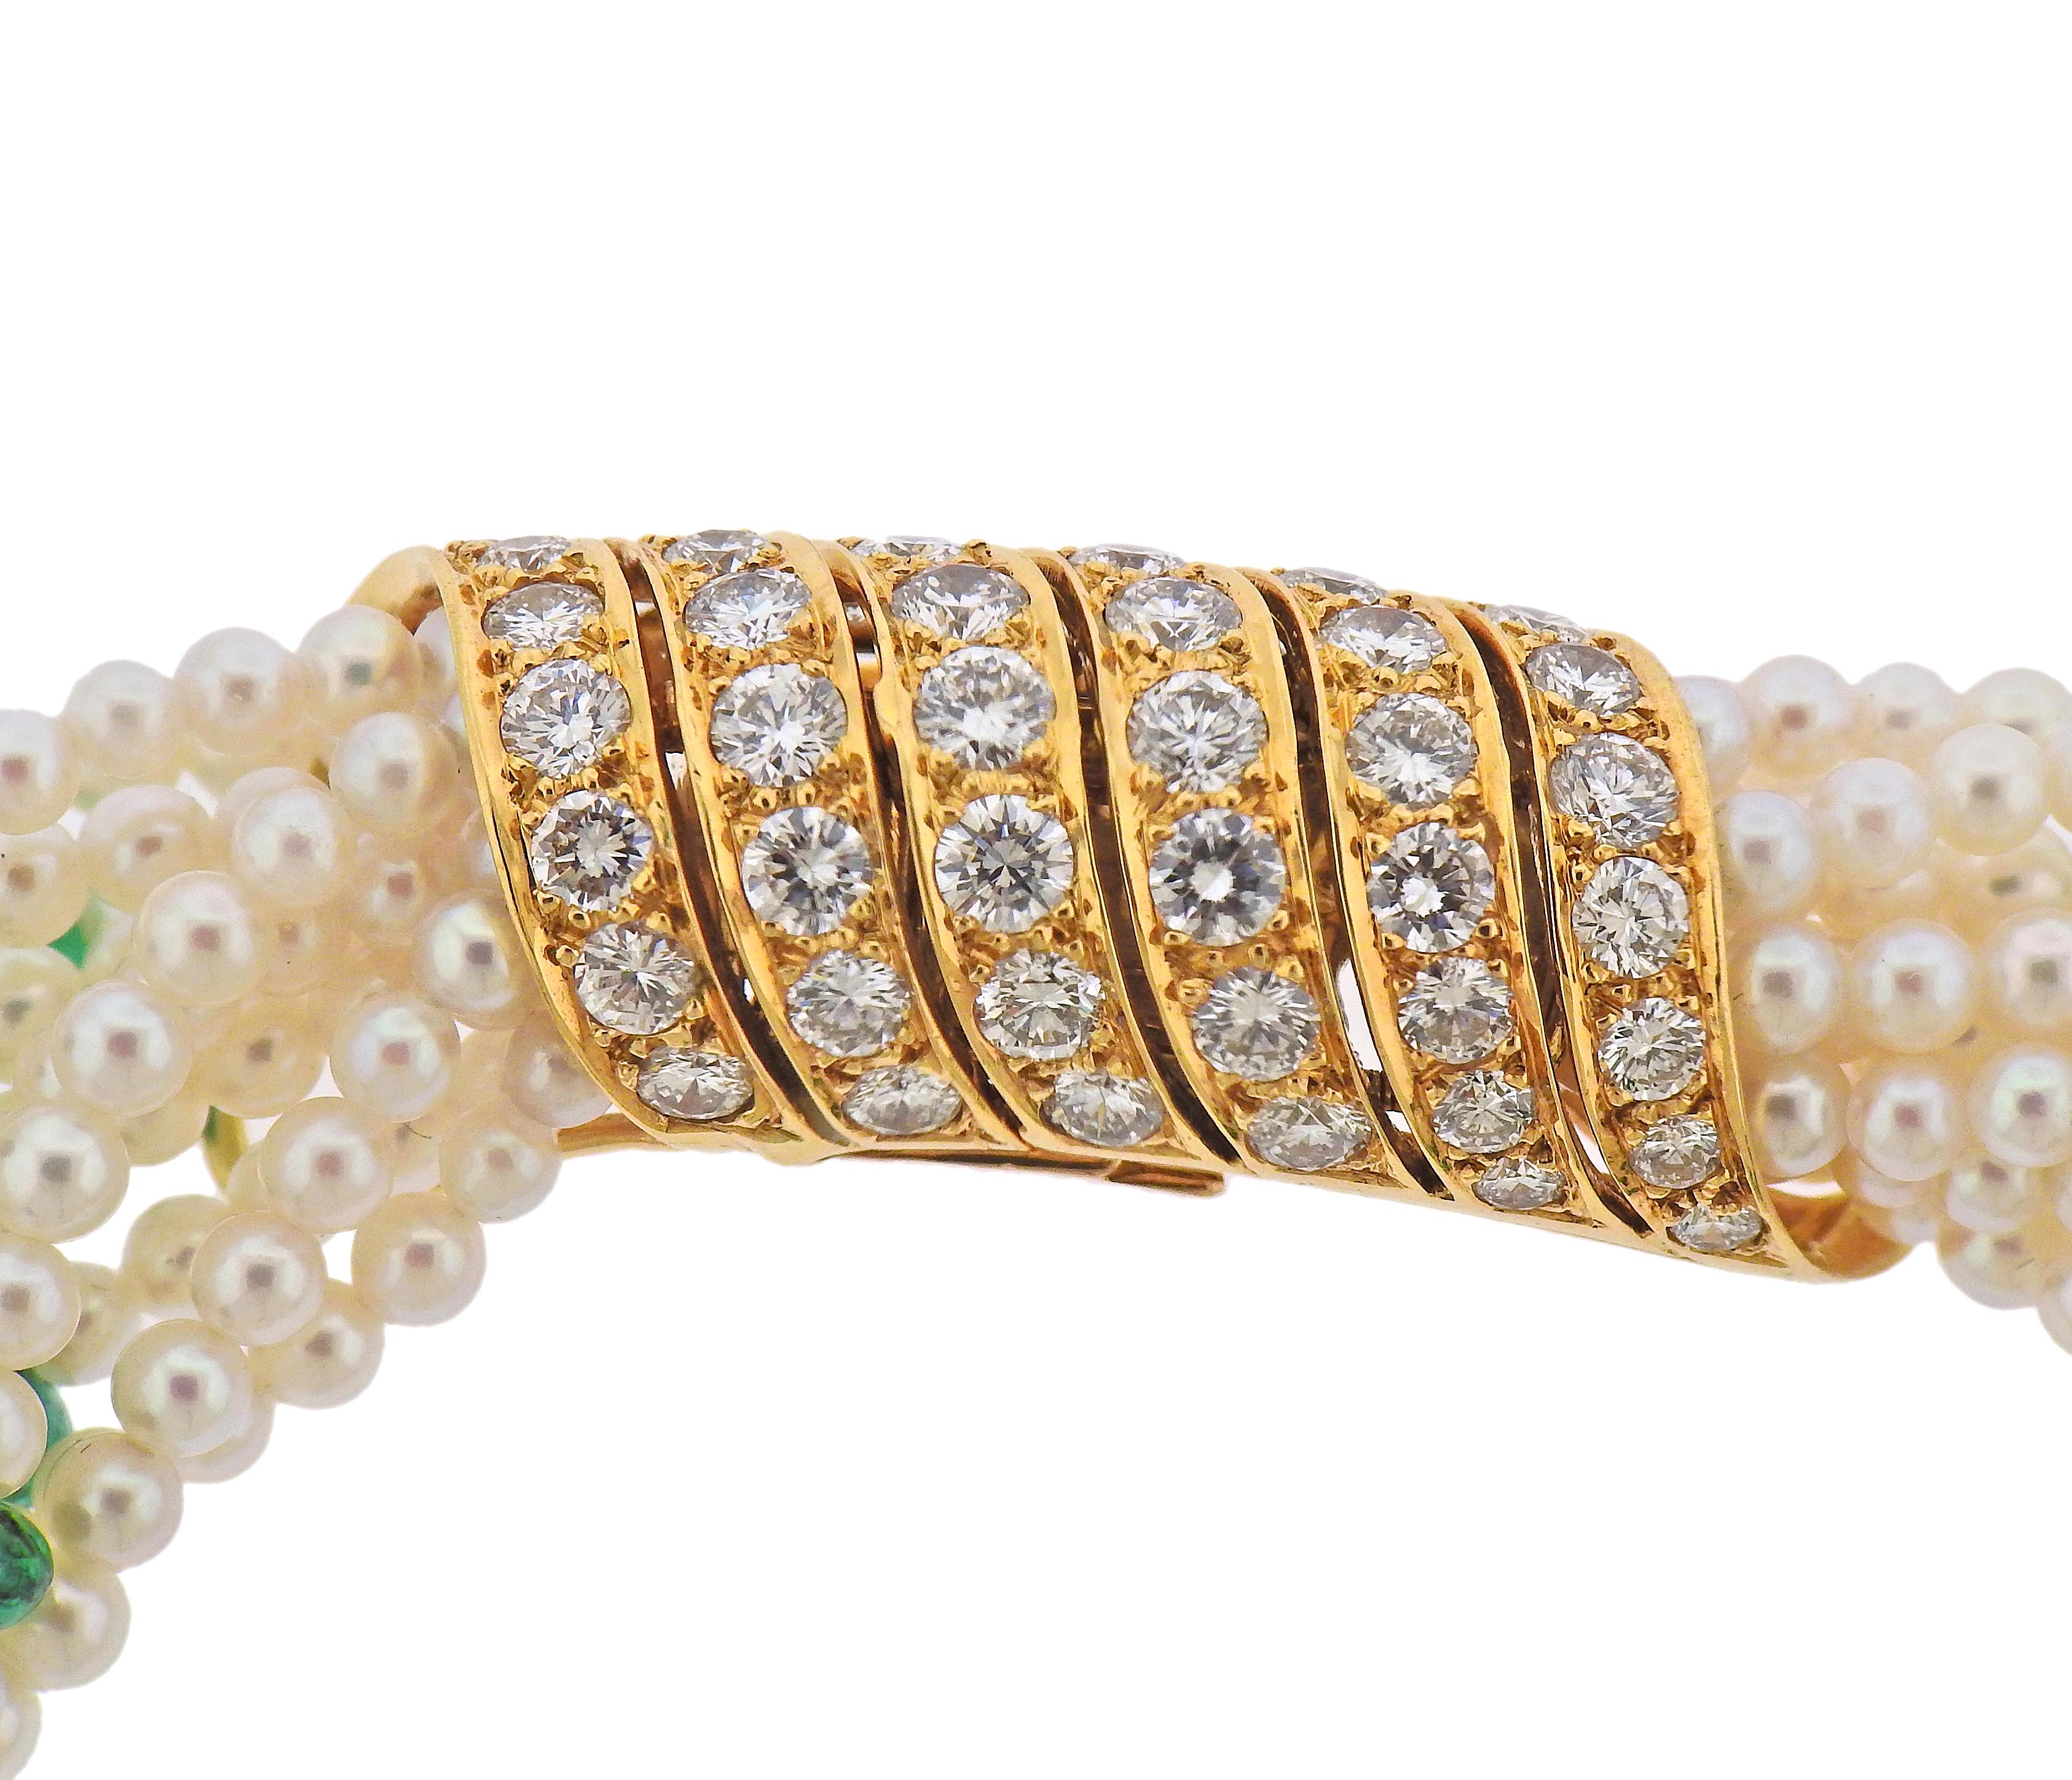 18k yellow gold multi strand Cartier bracelet, set with 4mm to 6mm emerald cabochons, 3mm to 3.5mm pearls and approx. 4.00 carats in diamonds. Bracelet is 8